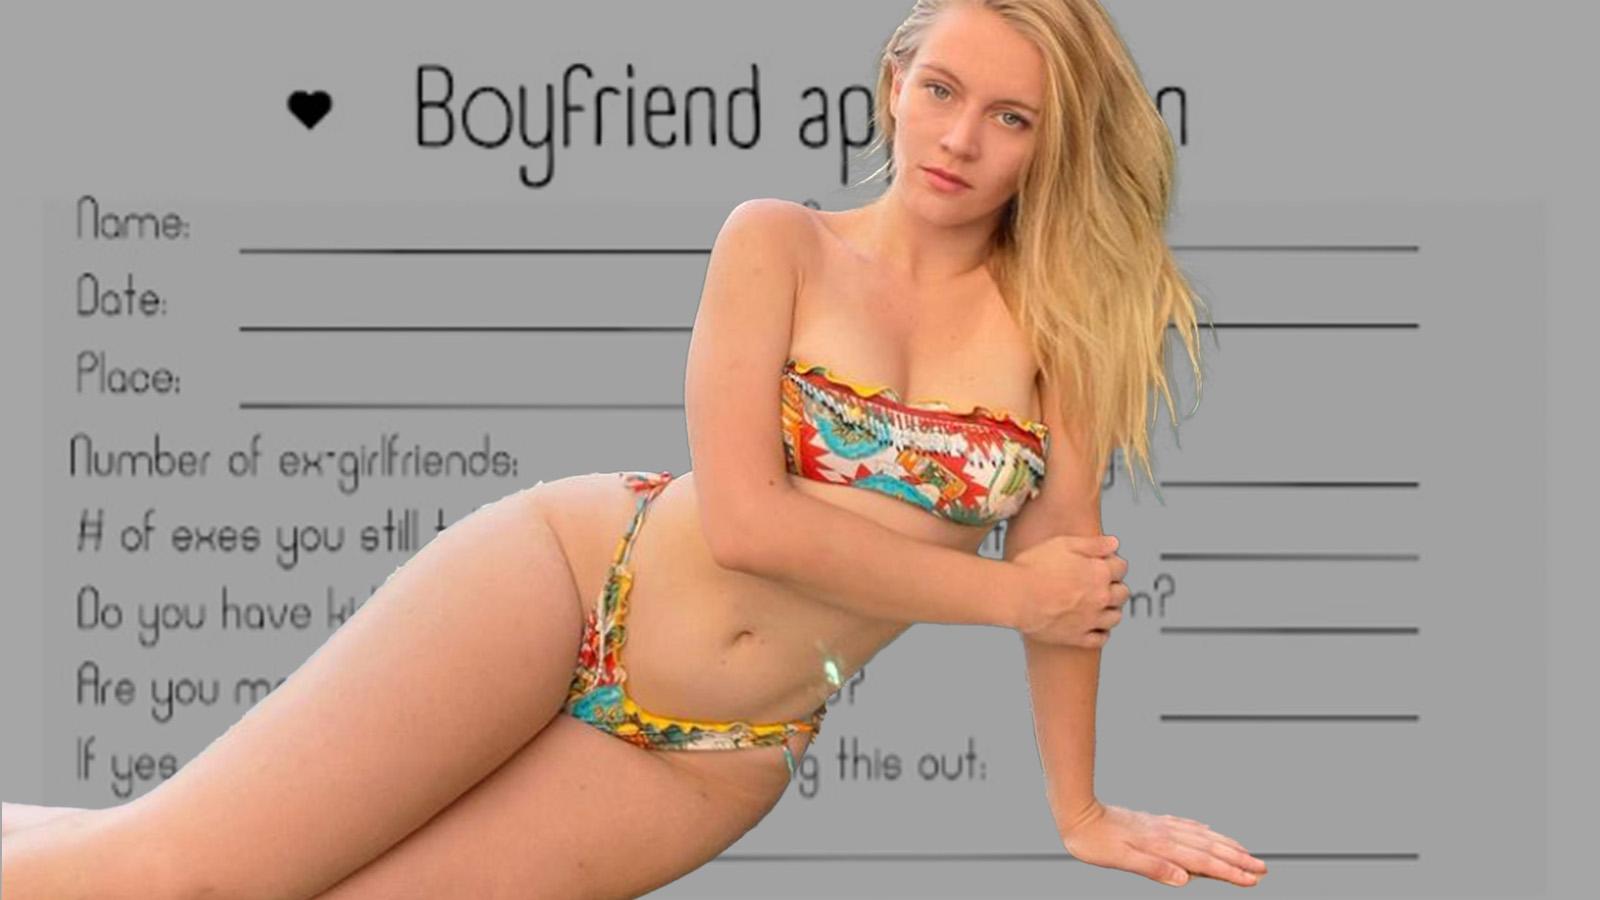 Instagram model’s boyfriend application attracts 3000 hopeful candidates within 24 hours